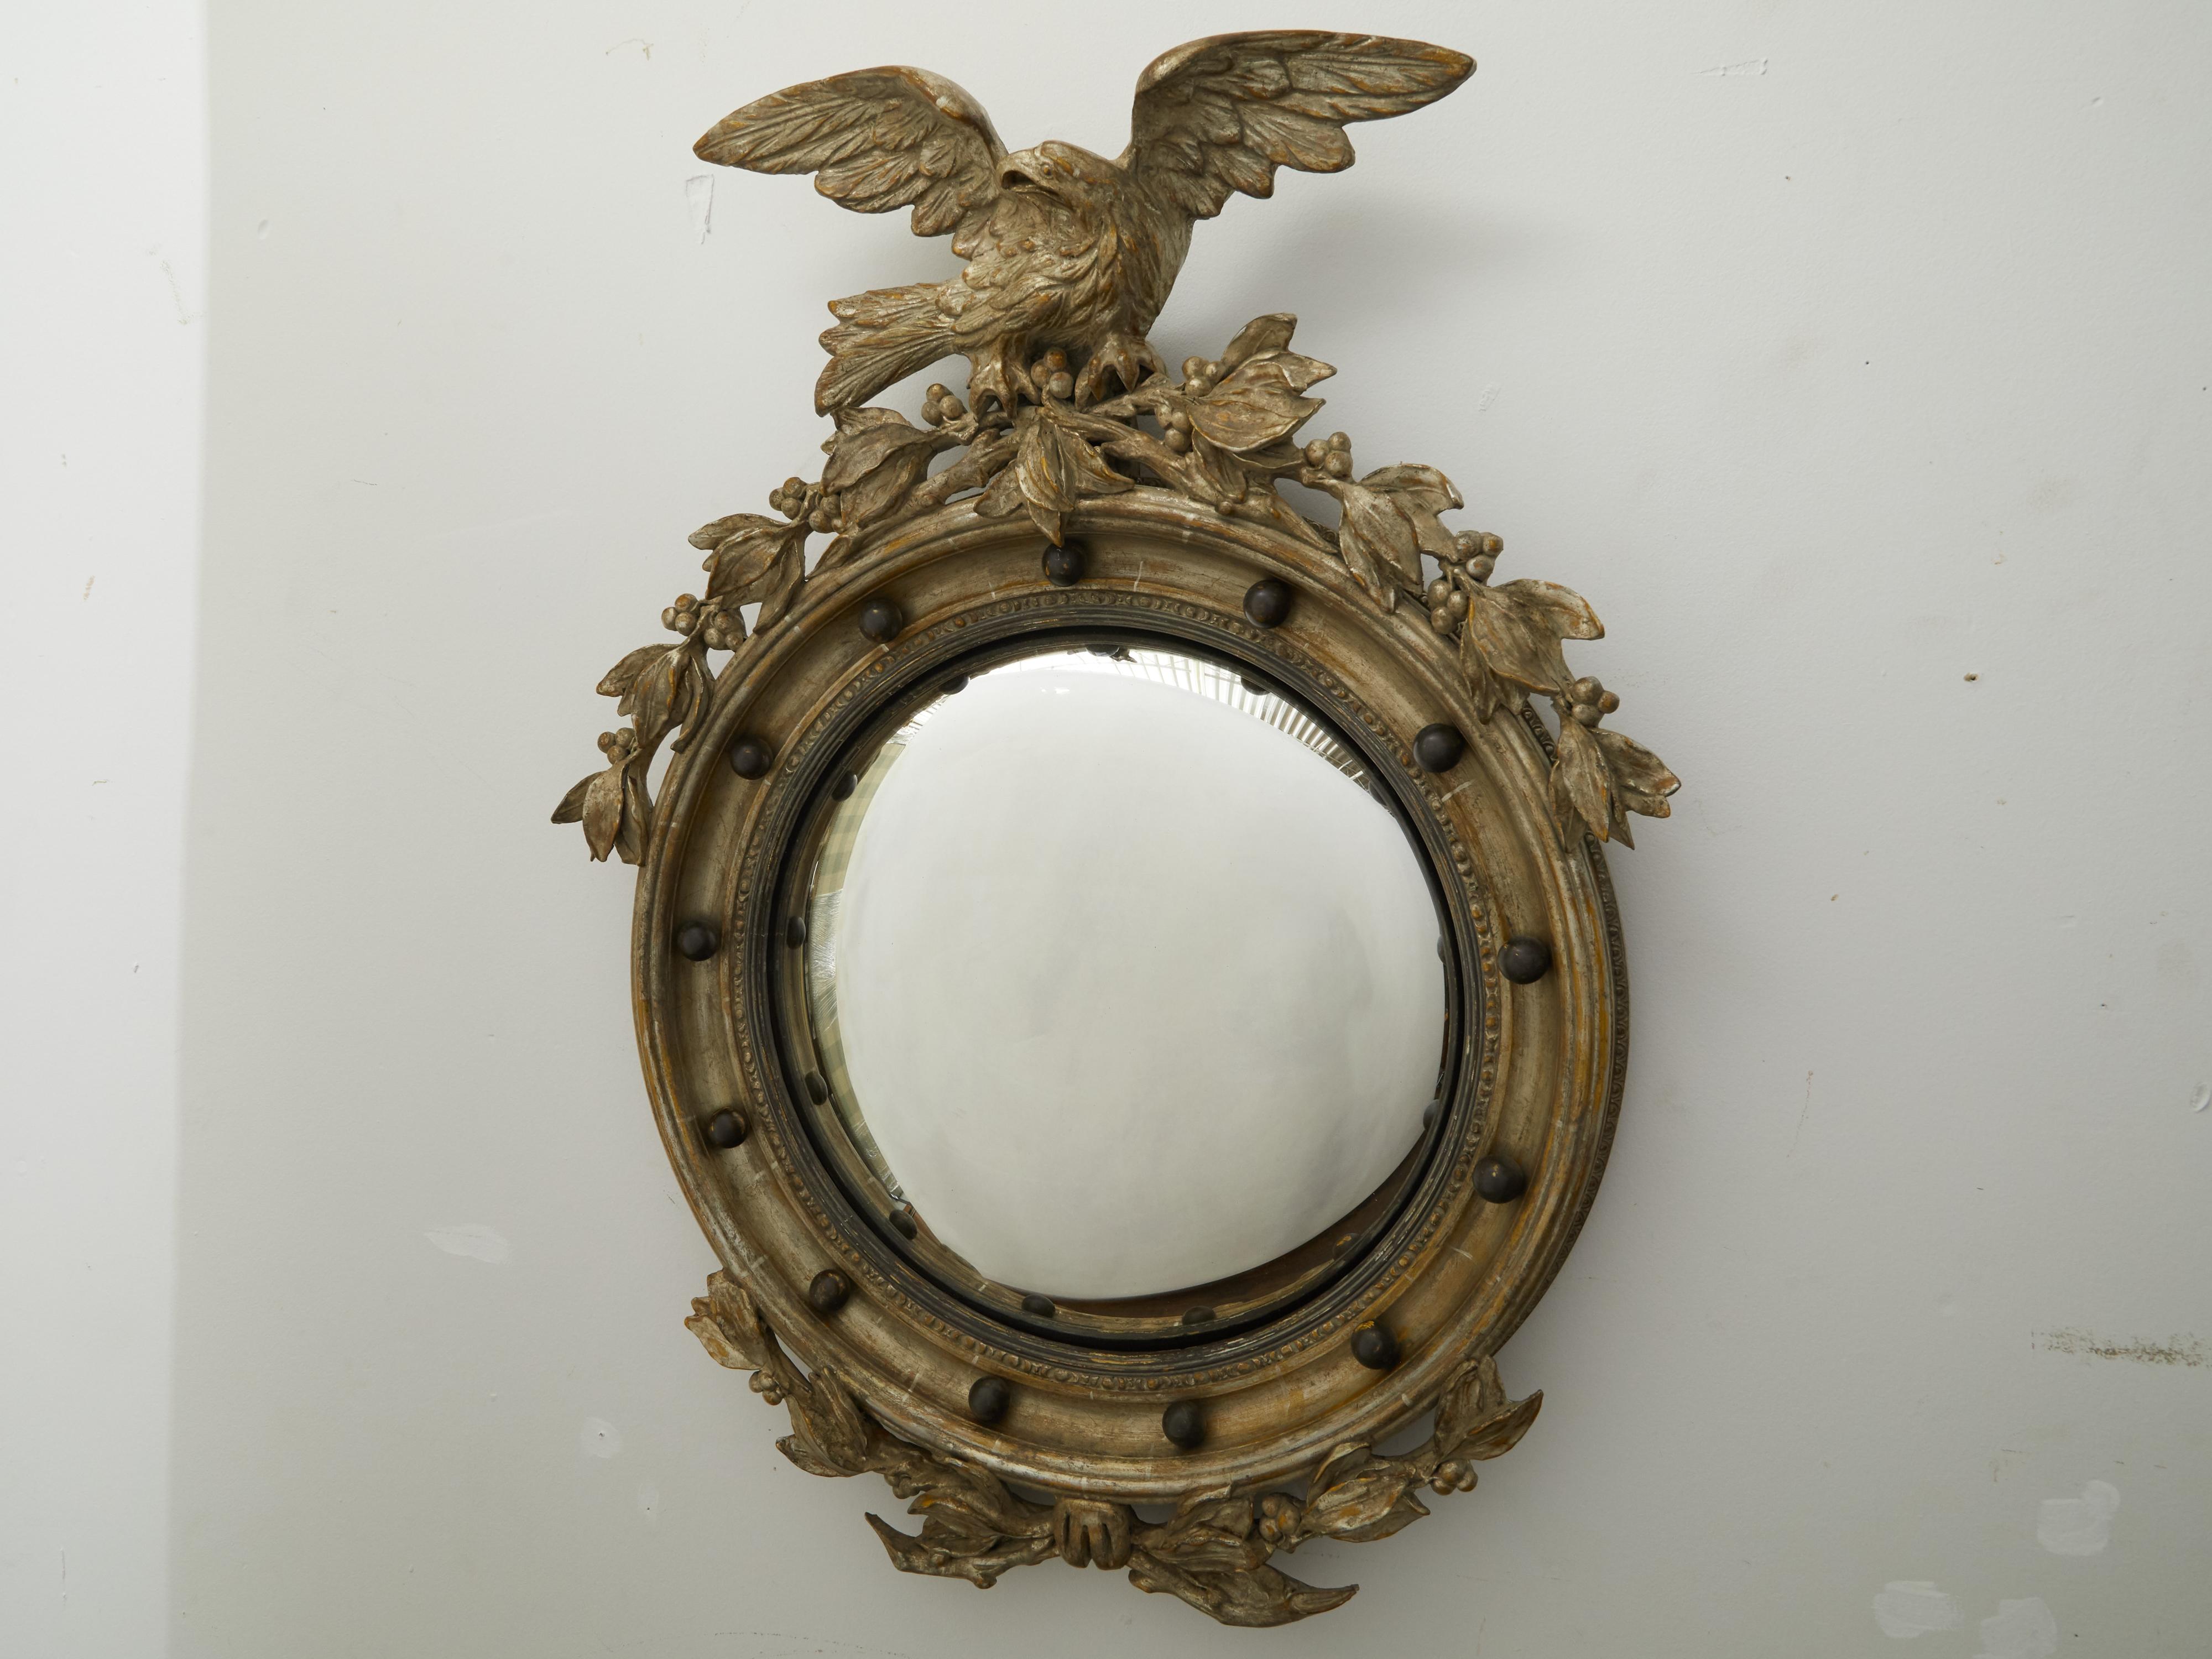 An English silver gilt convex girandole bullseye mirror from the early 20th century, with eagle motif. Created in England during the early years of the 20th century, this silver girandole mirror attracts our attention with its eagle marking the